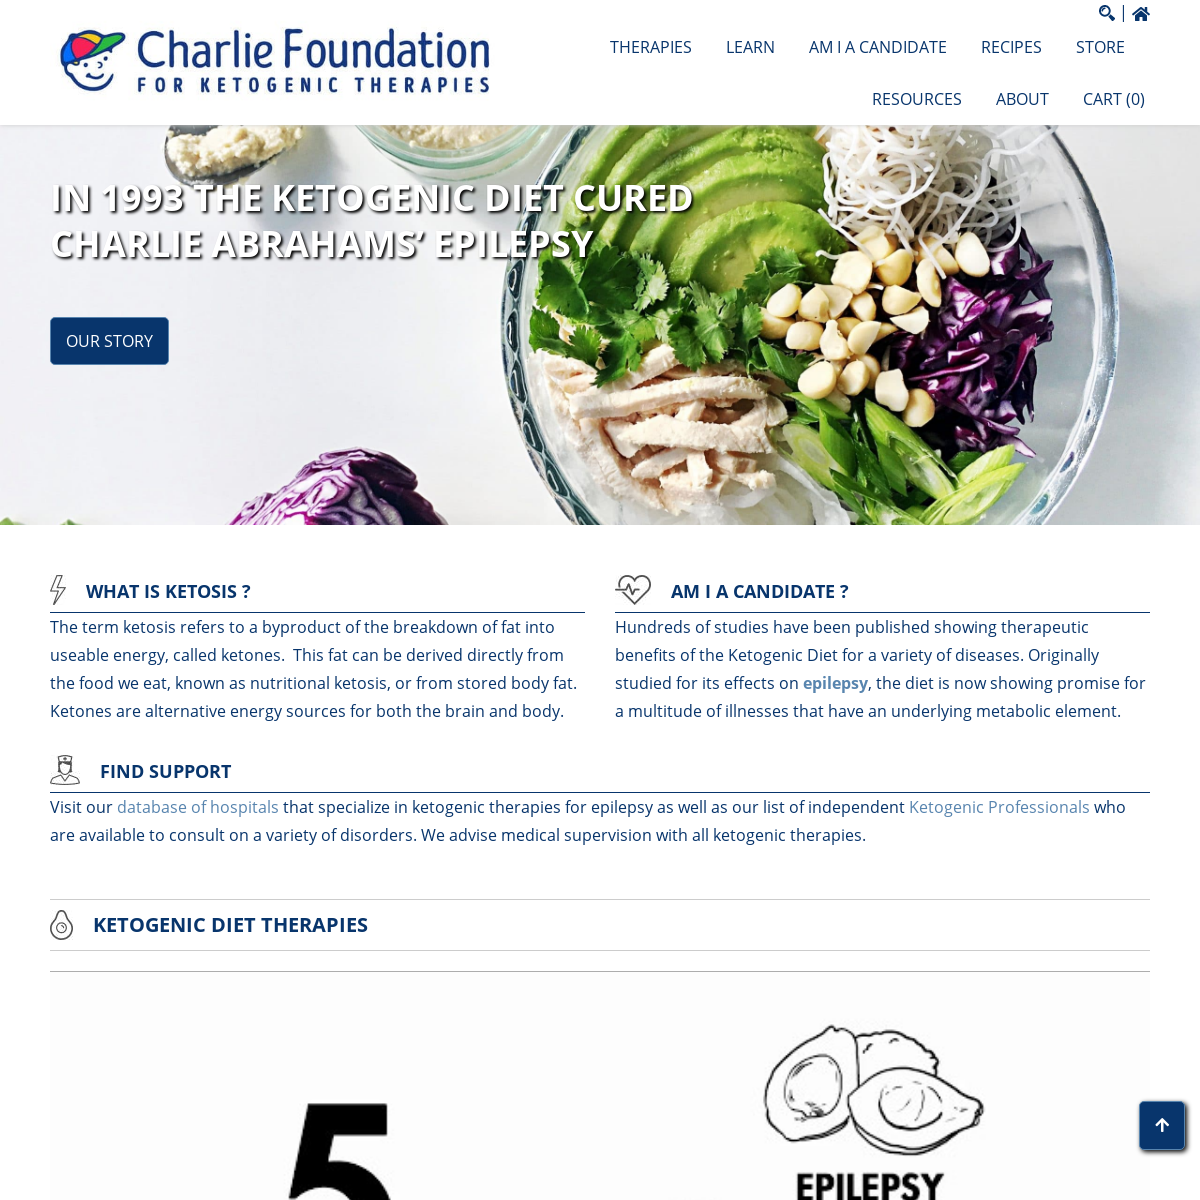 A complete backup of charliefoundation.org